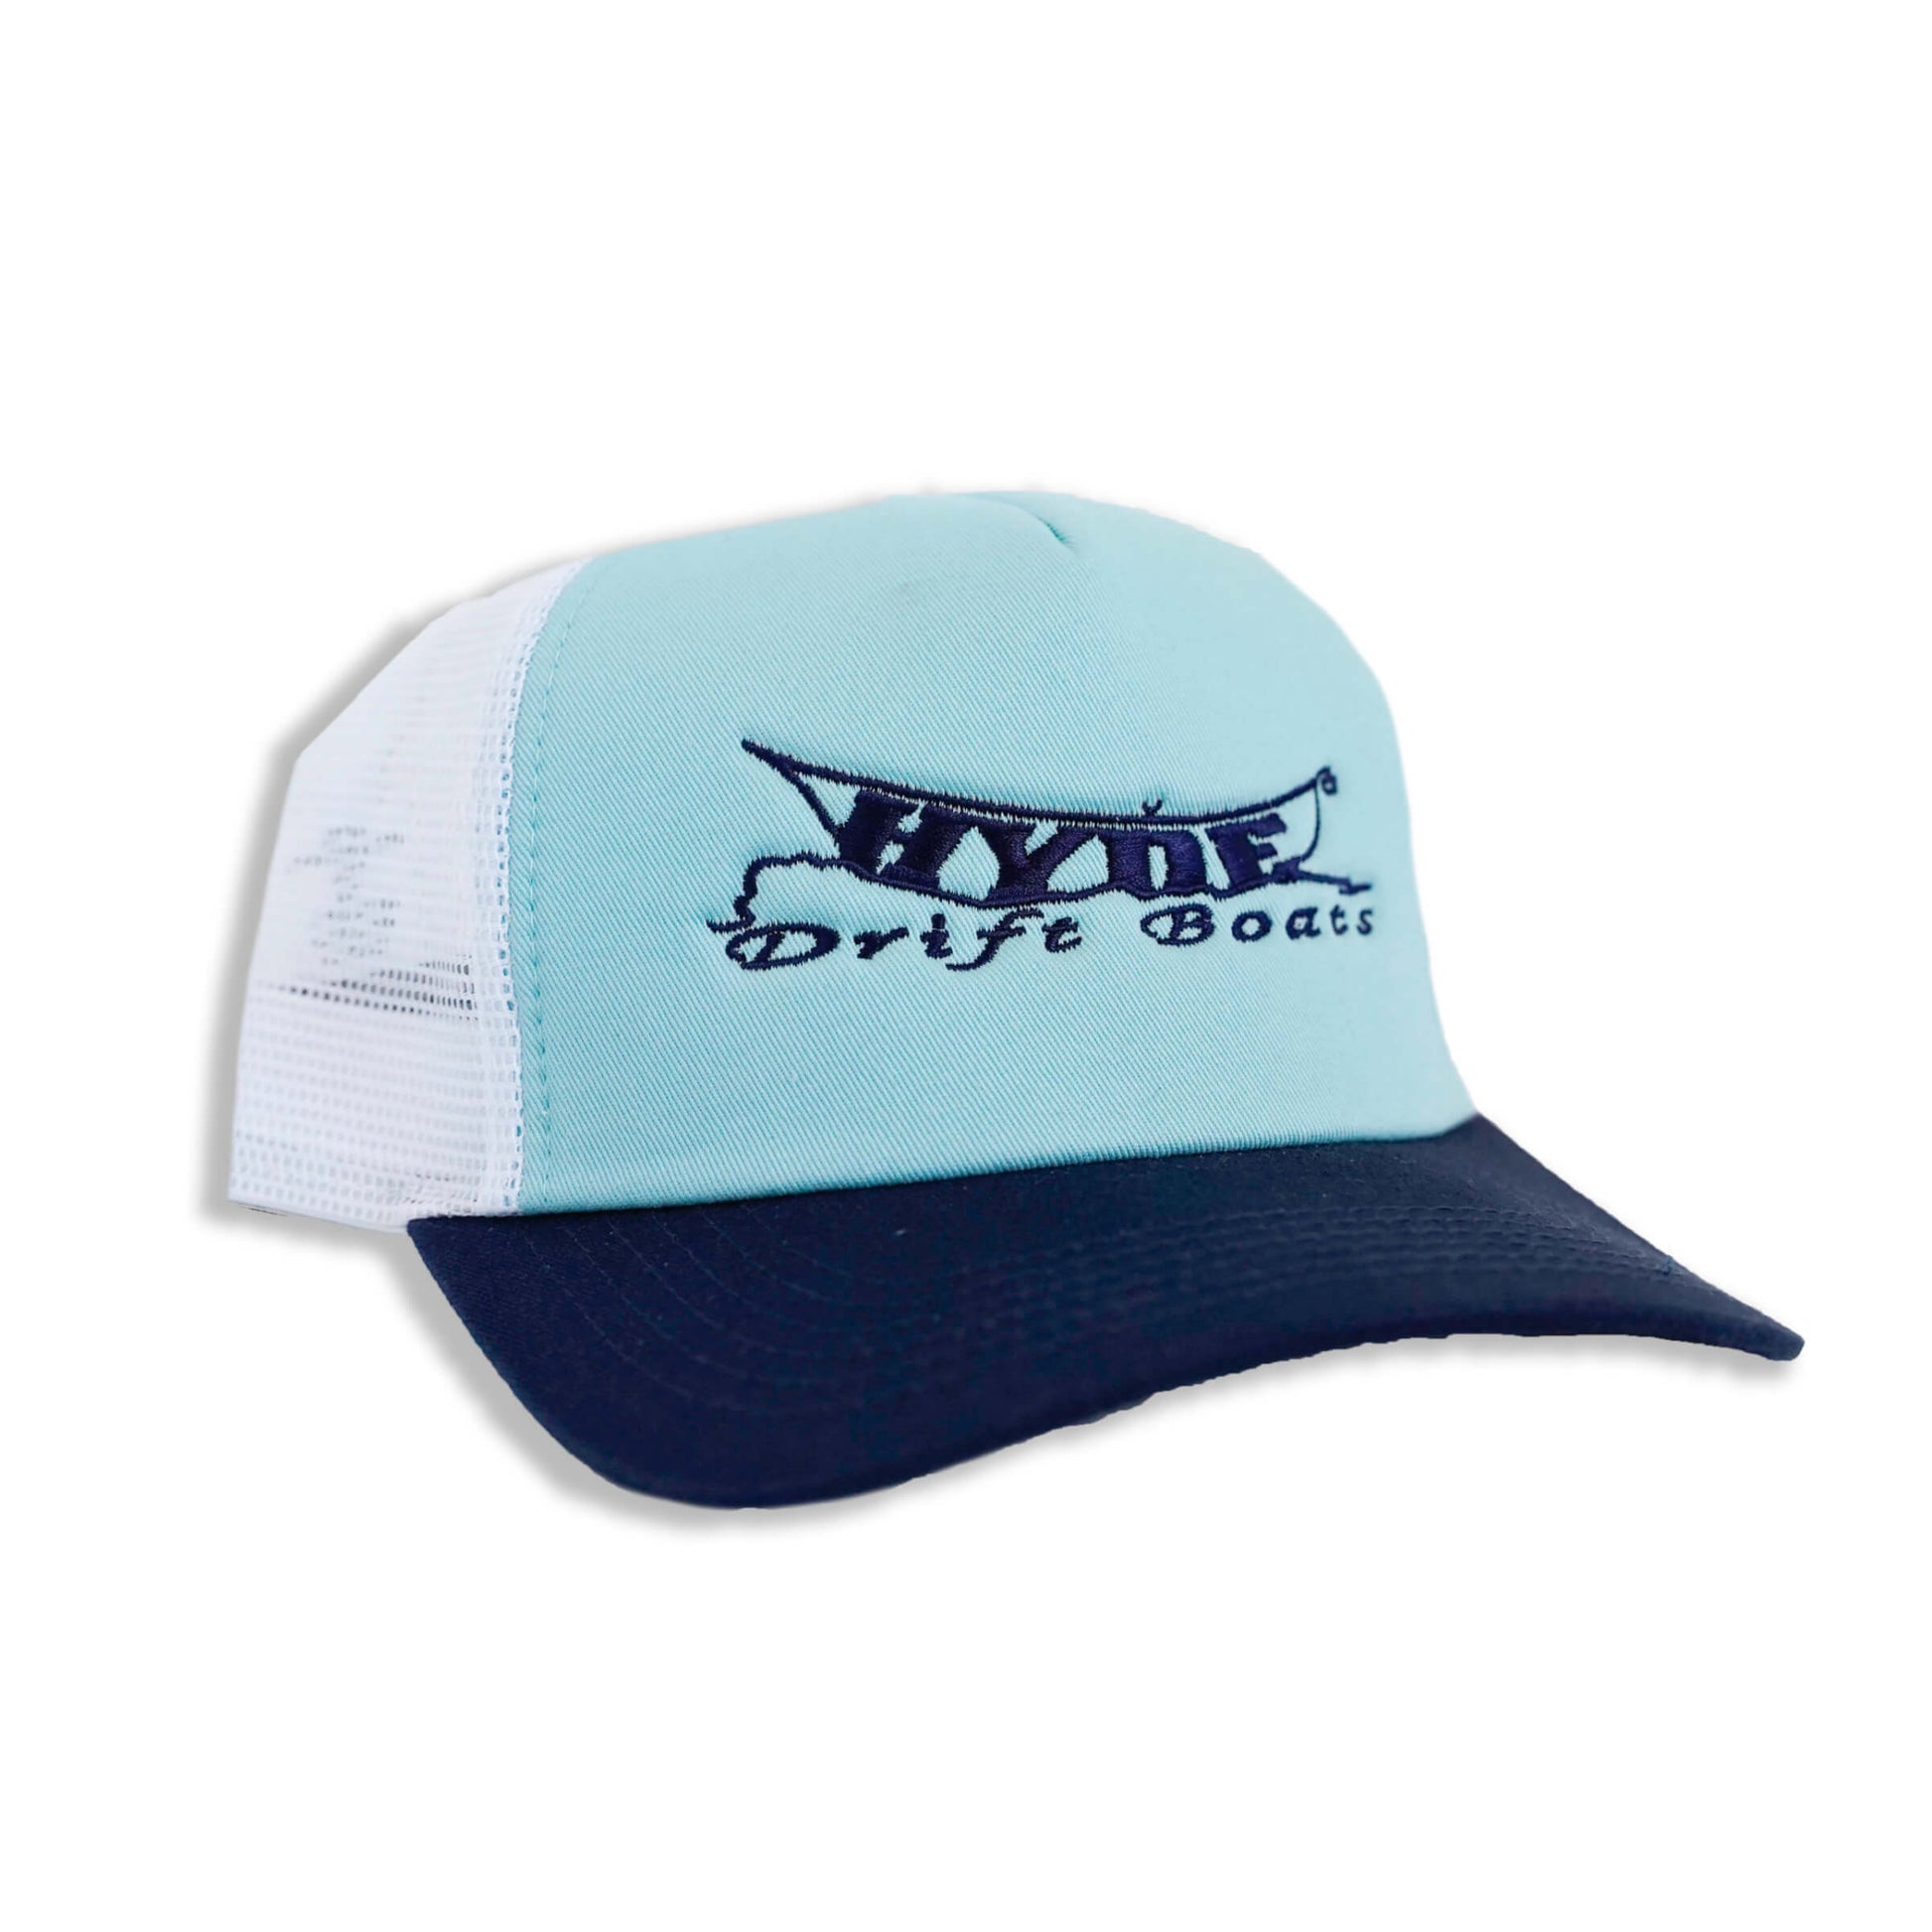 North Country Hyde Trucker Hat Jewel / Navy / White